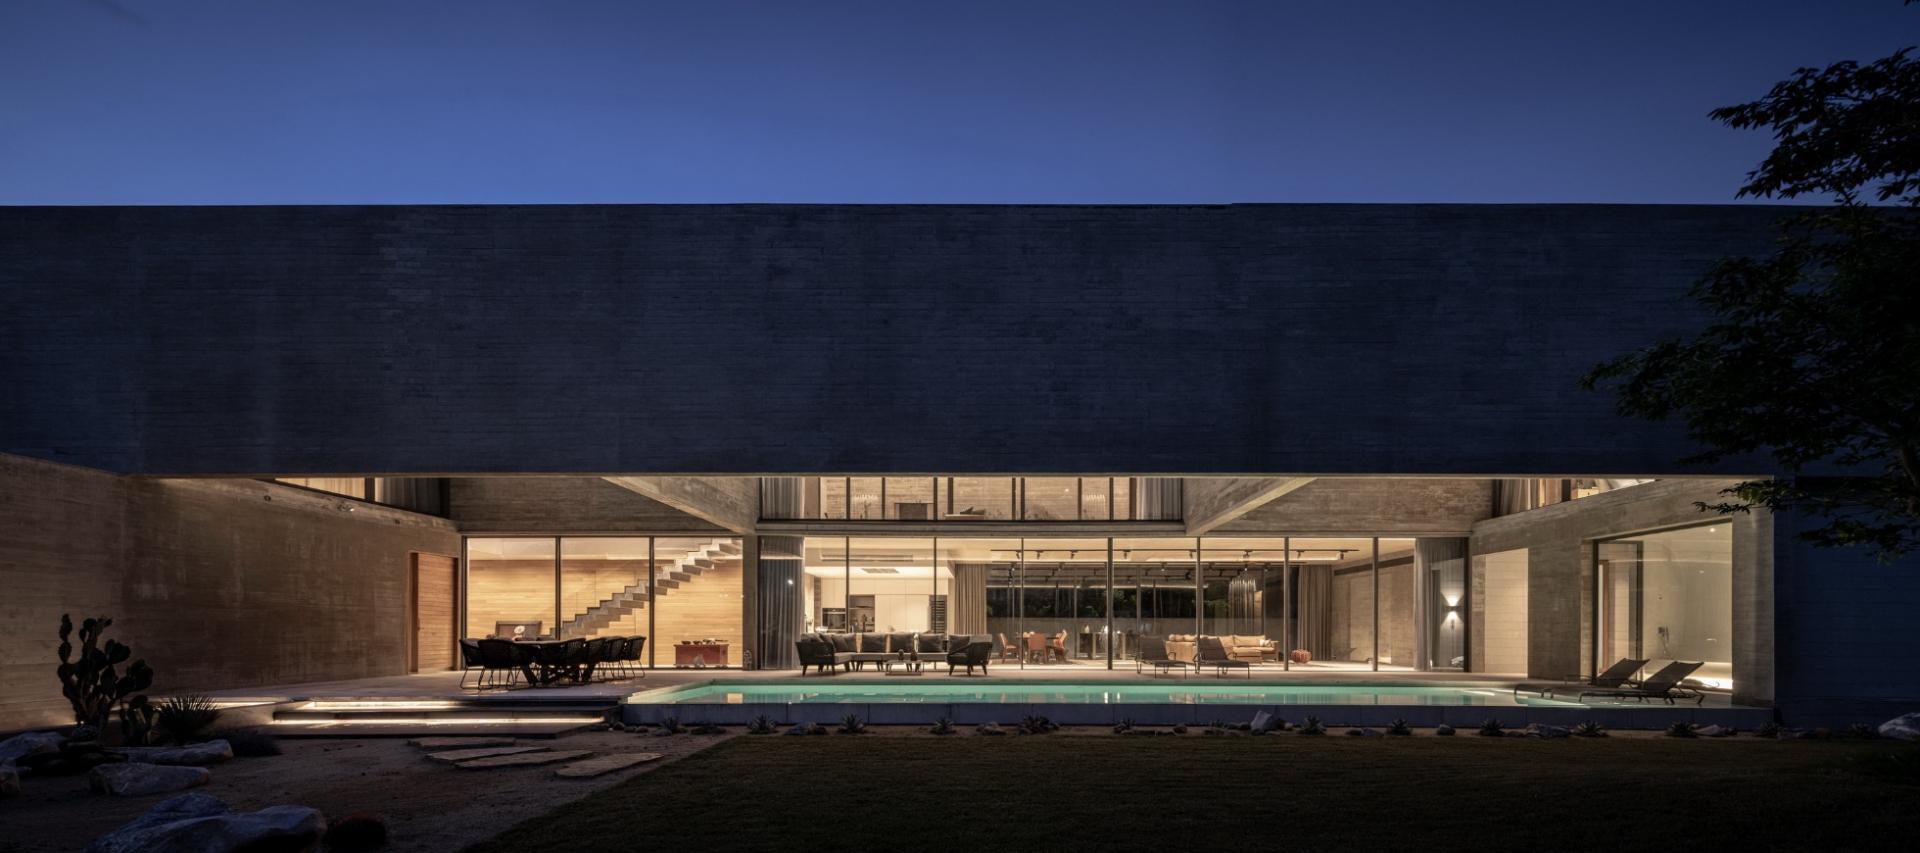 This monolithic Thailand-based residence resembles brutalist architecture